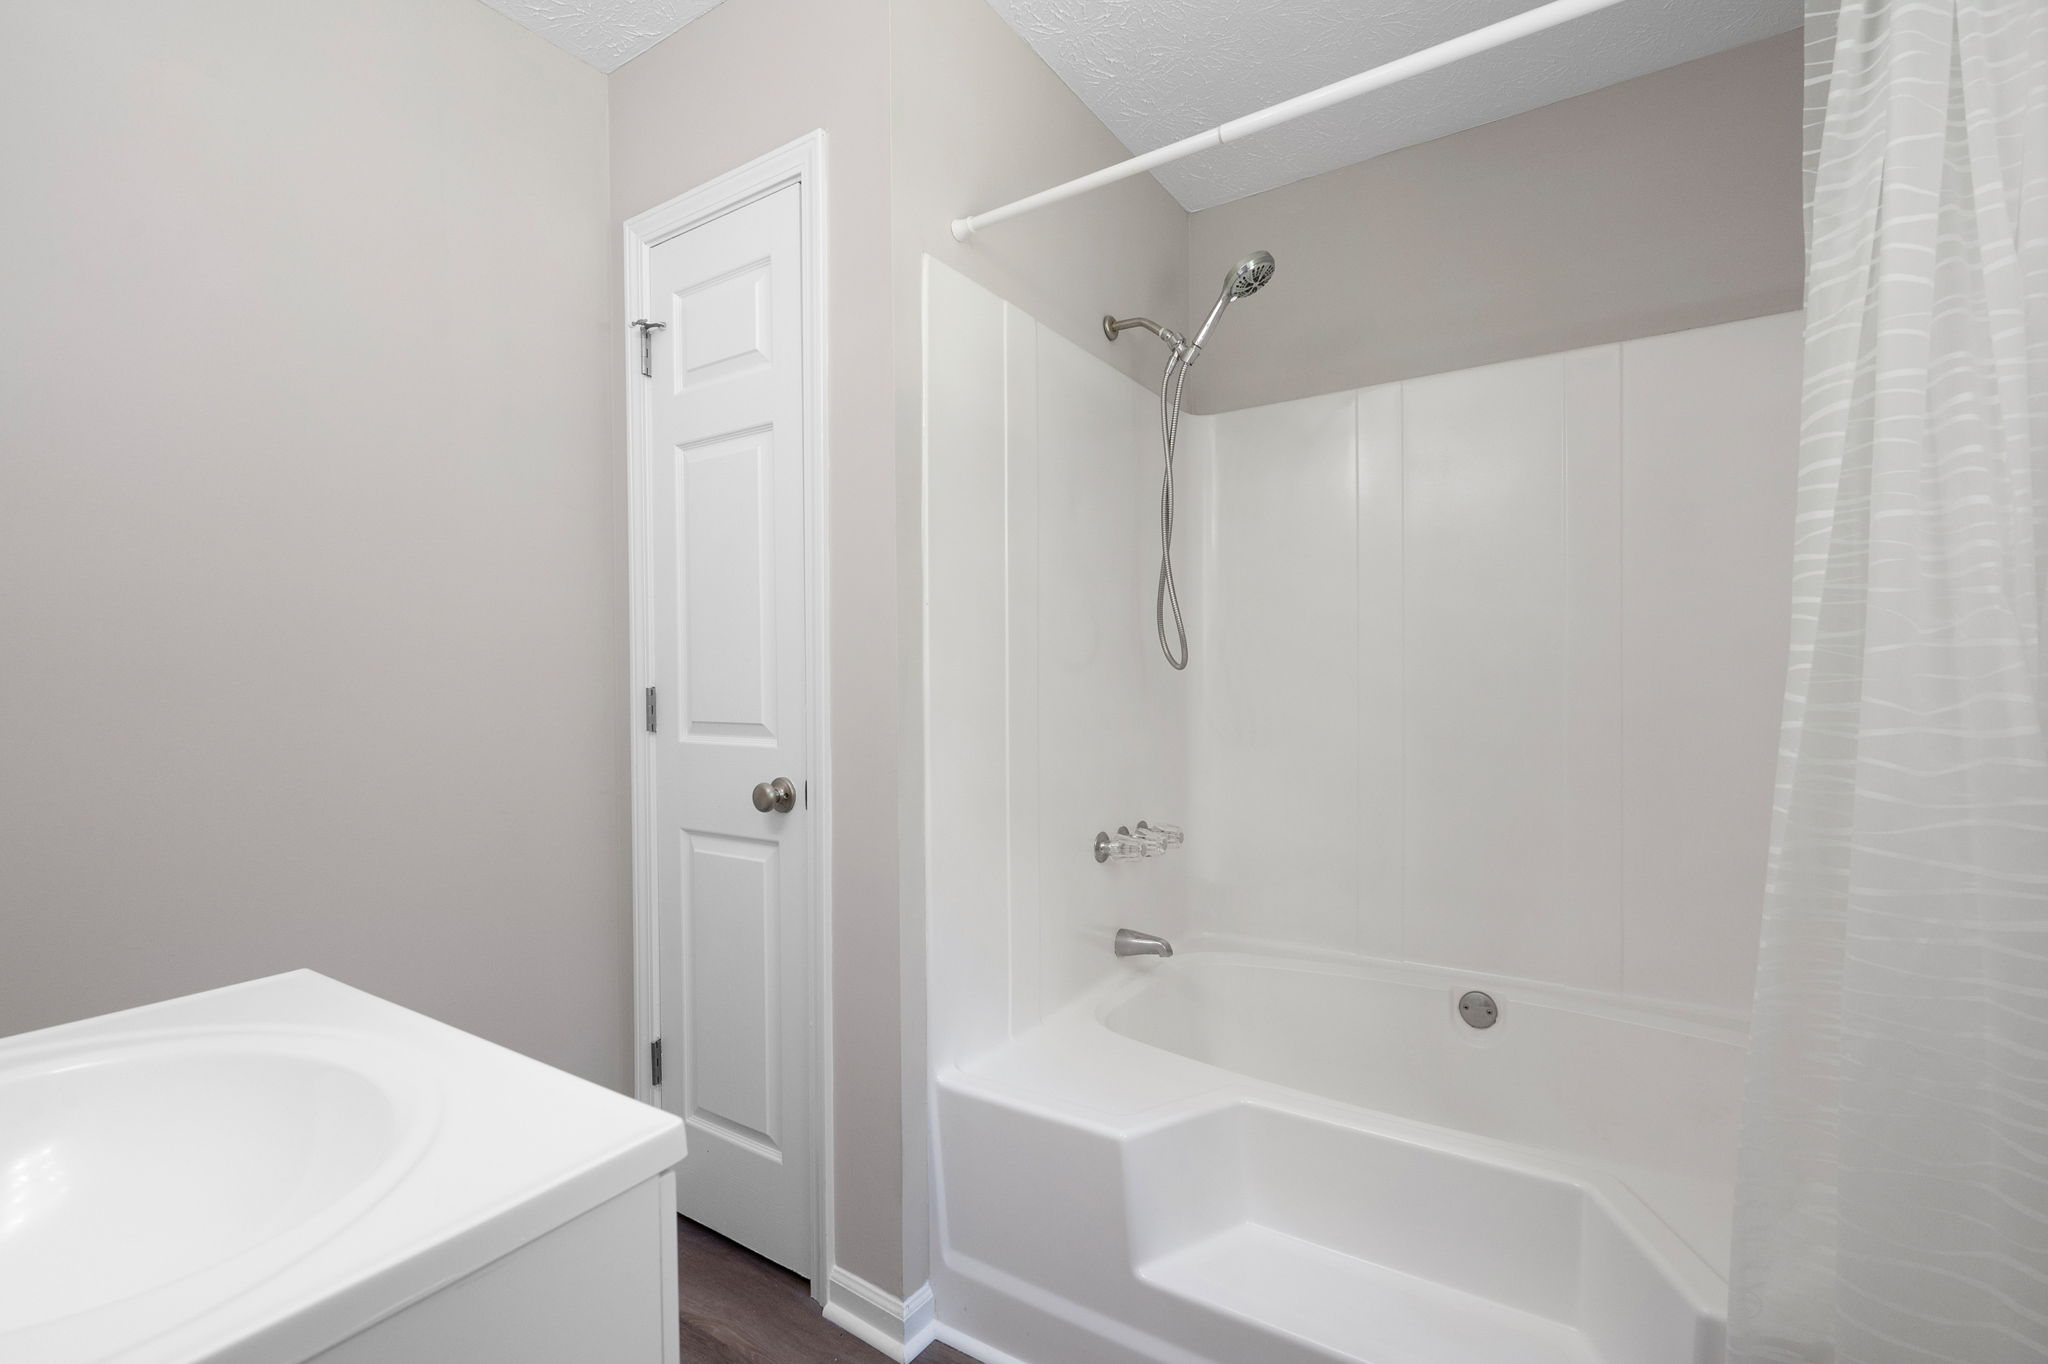 The newly renovated a primary bathroom features new flooring, a newly glazed bathtub...